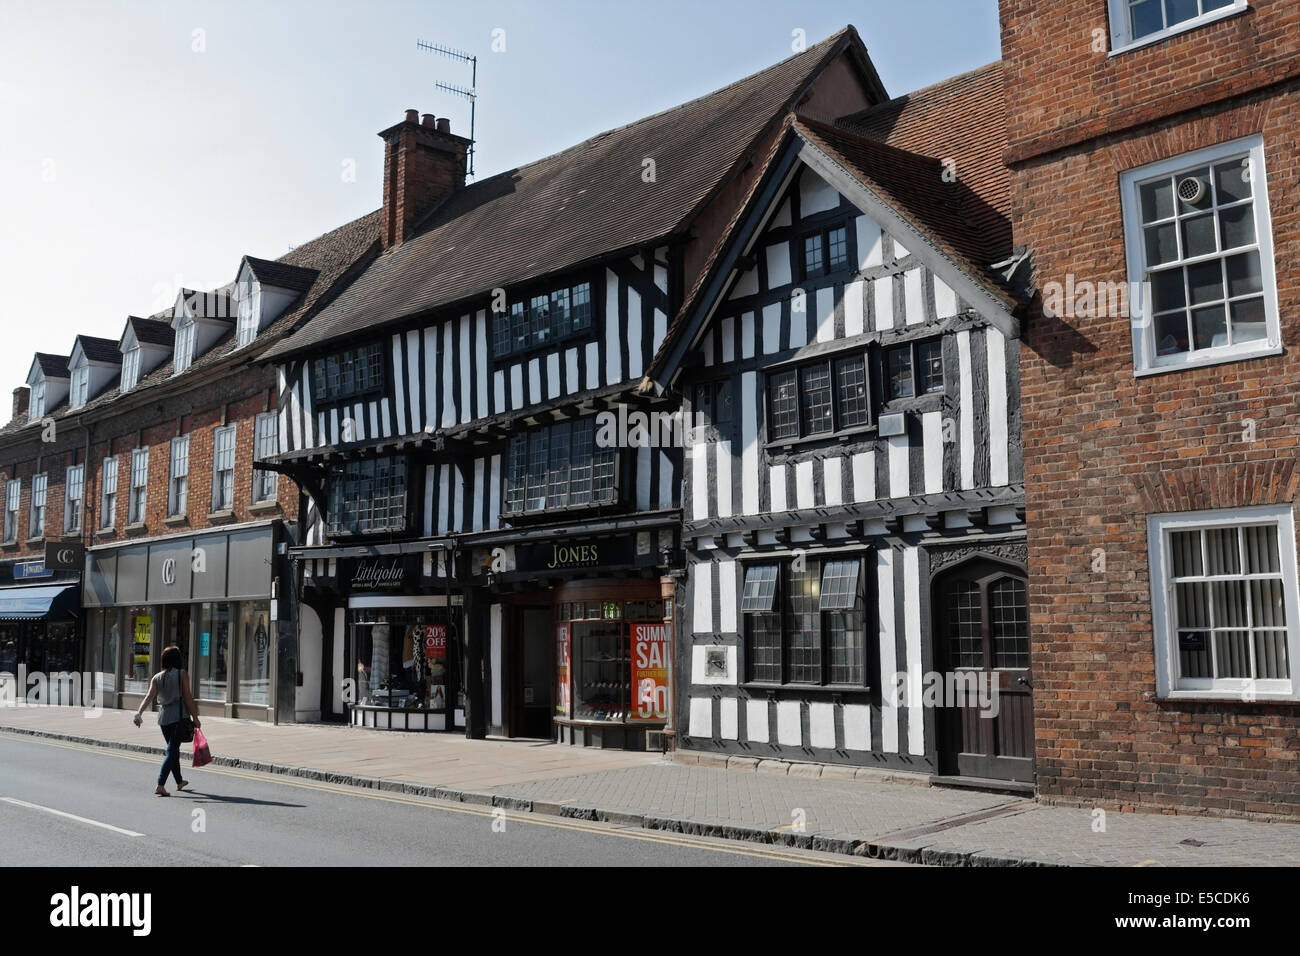 Wood street in Stratford upon Avon England, English Timbered Buildings, grade 2 listed. town centre, 16th century architecture Stock Photo